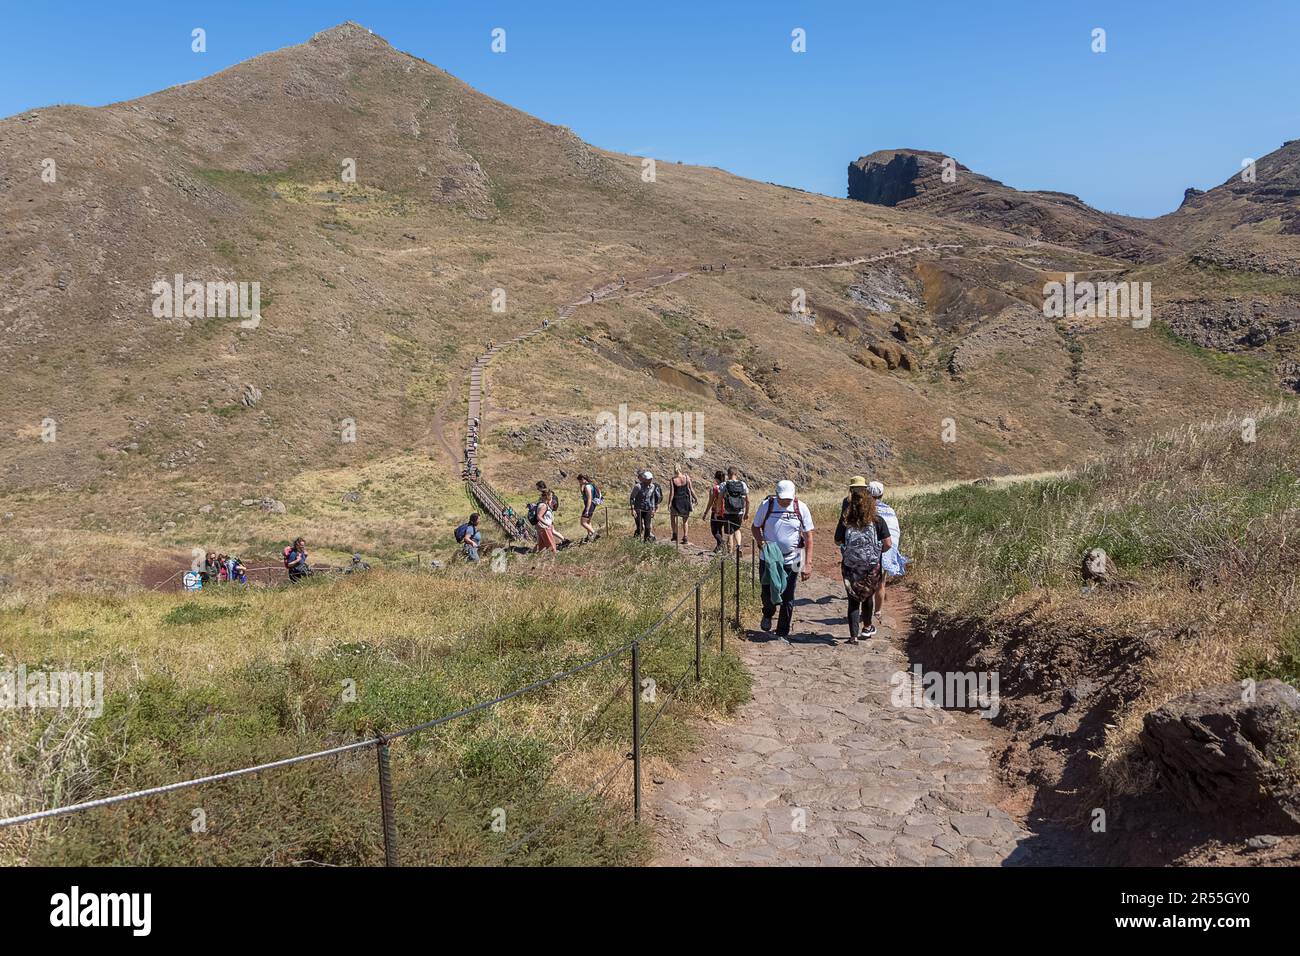 Madeira Island Portugal - 04 19 2023: Panoramic view of a group of tourists hiking in St. Lourenço Cape or Cabo de São Lourenço, on Madeira Island, Po Stock Photo